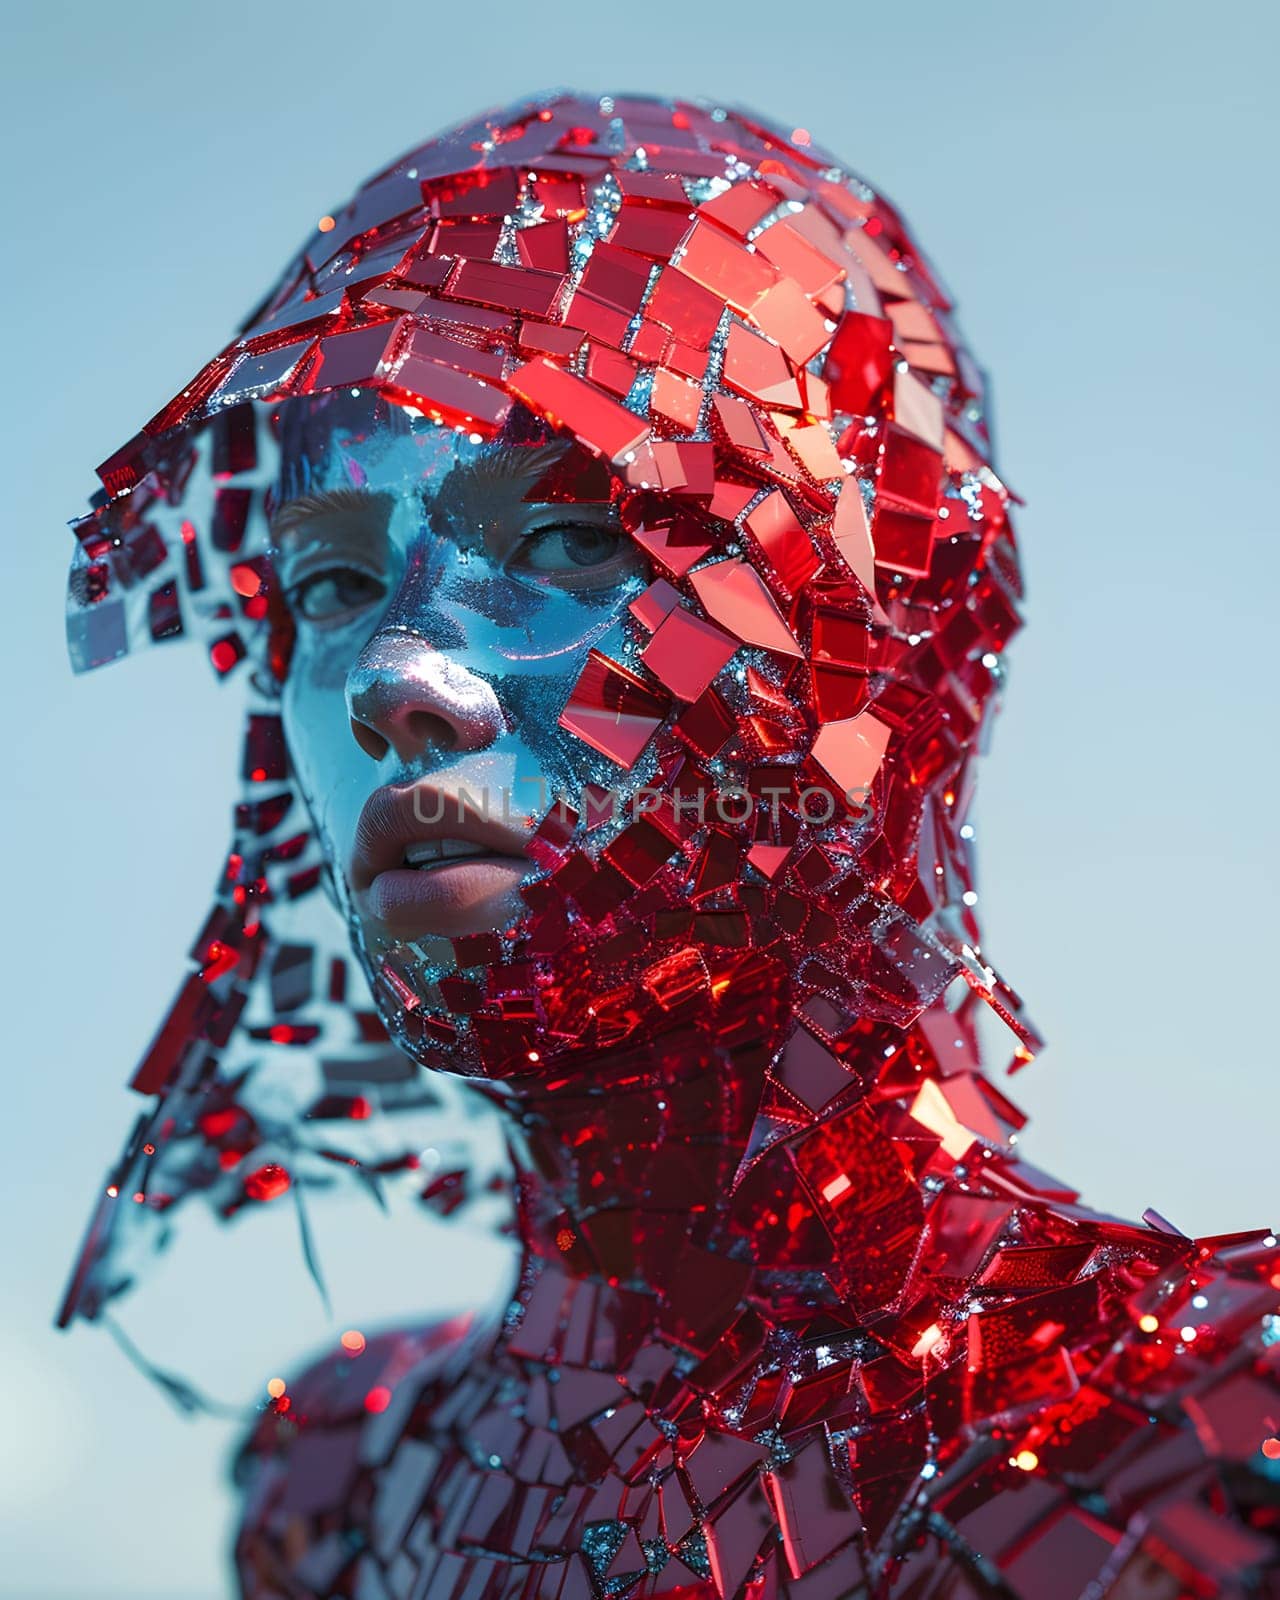 A closeup shot of a human face adorned with red sequins, showcasing intricate patterns and textures. The neck, jaw, and facial hair are accentuated, resembling a sculpture in electric blue and art